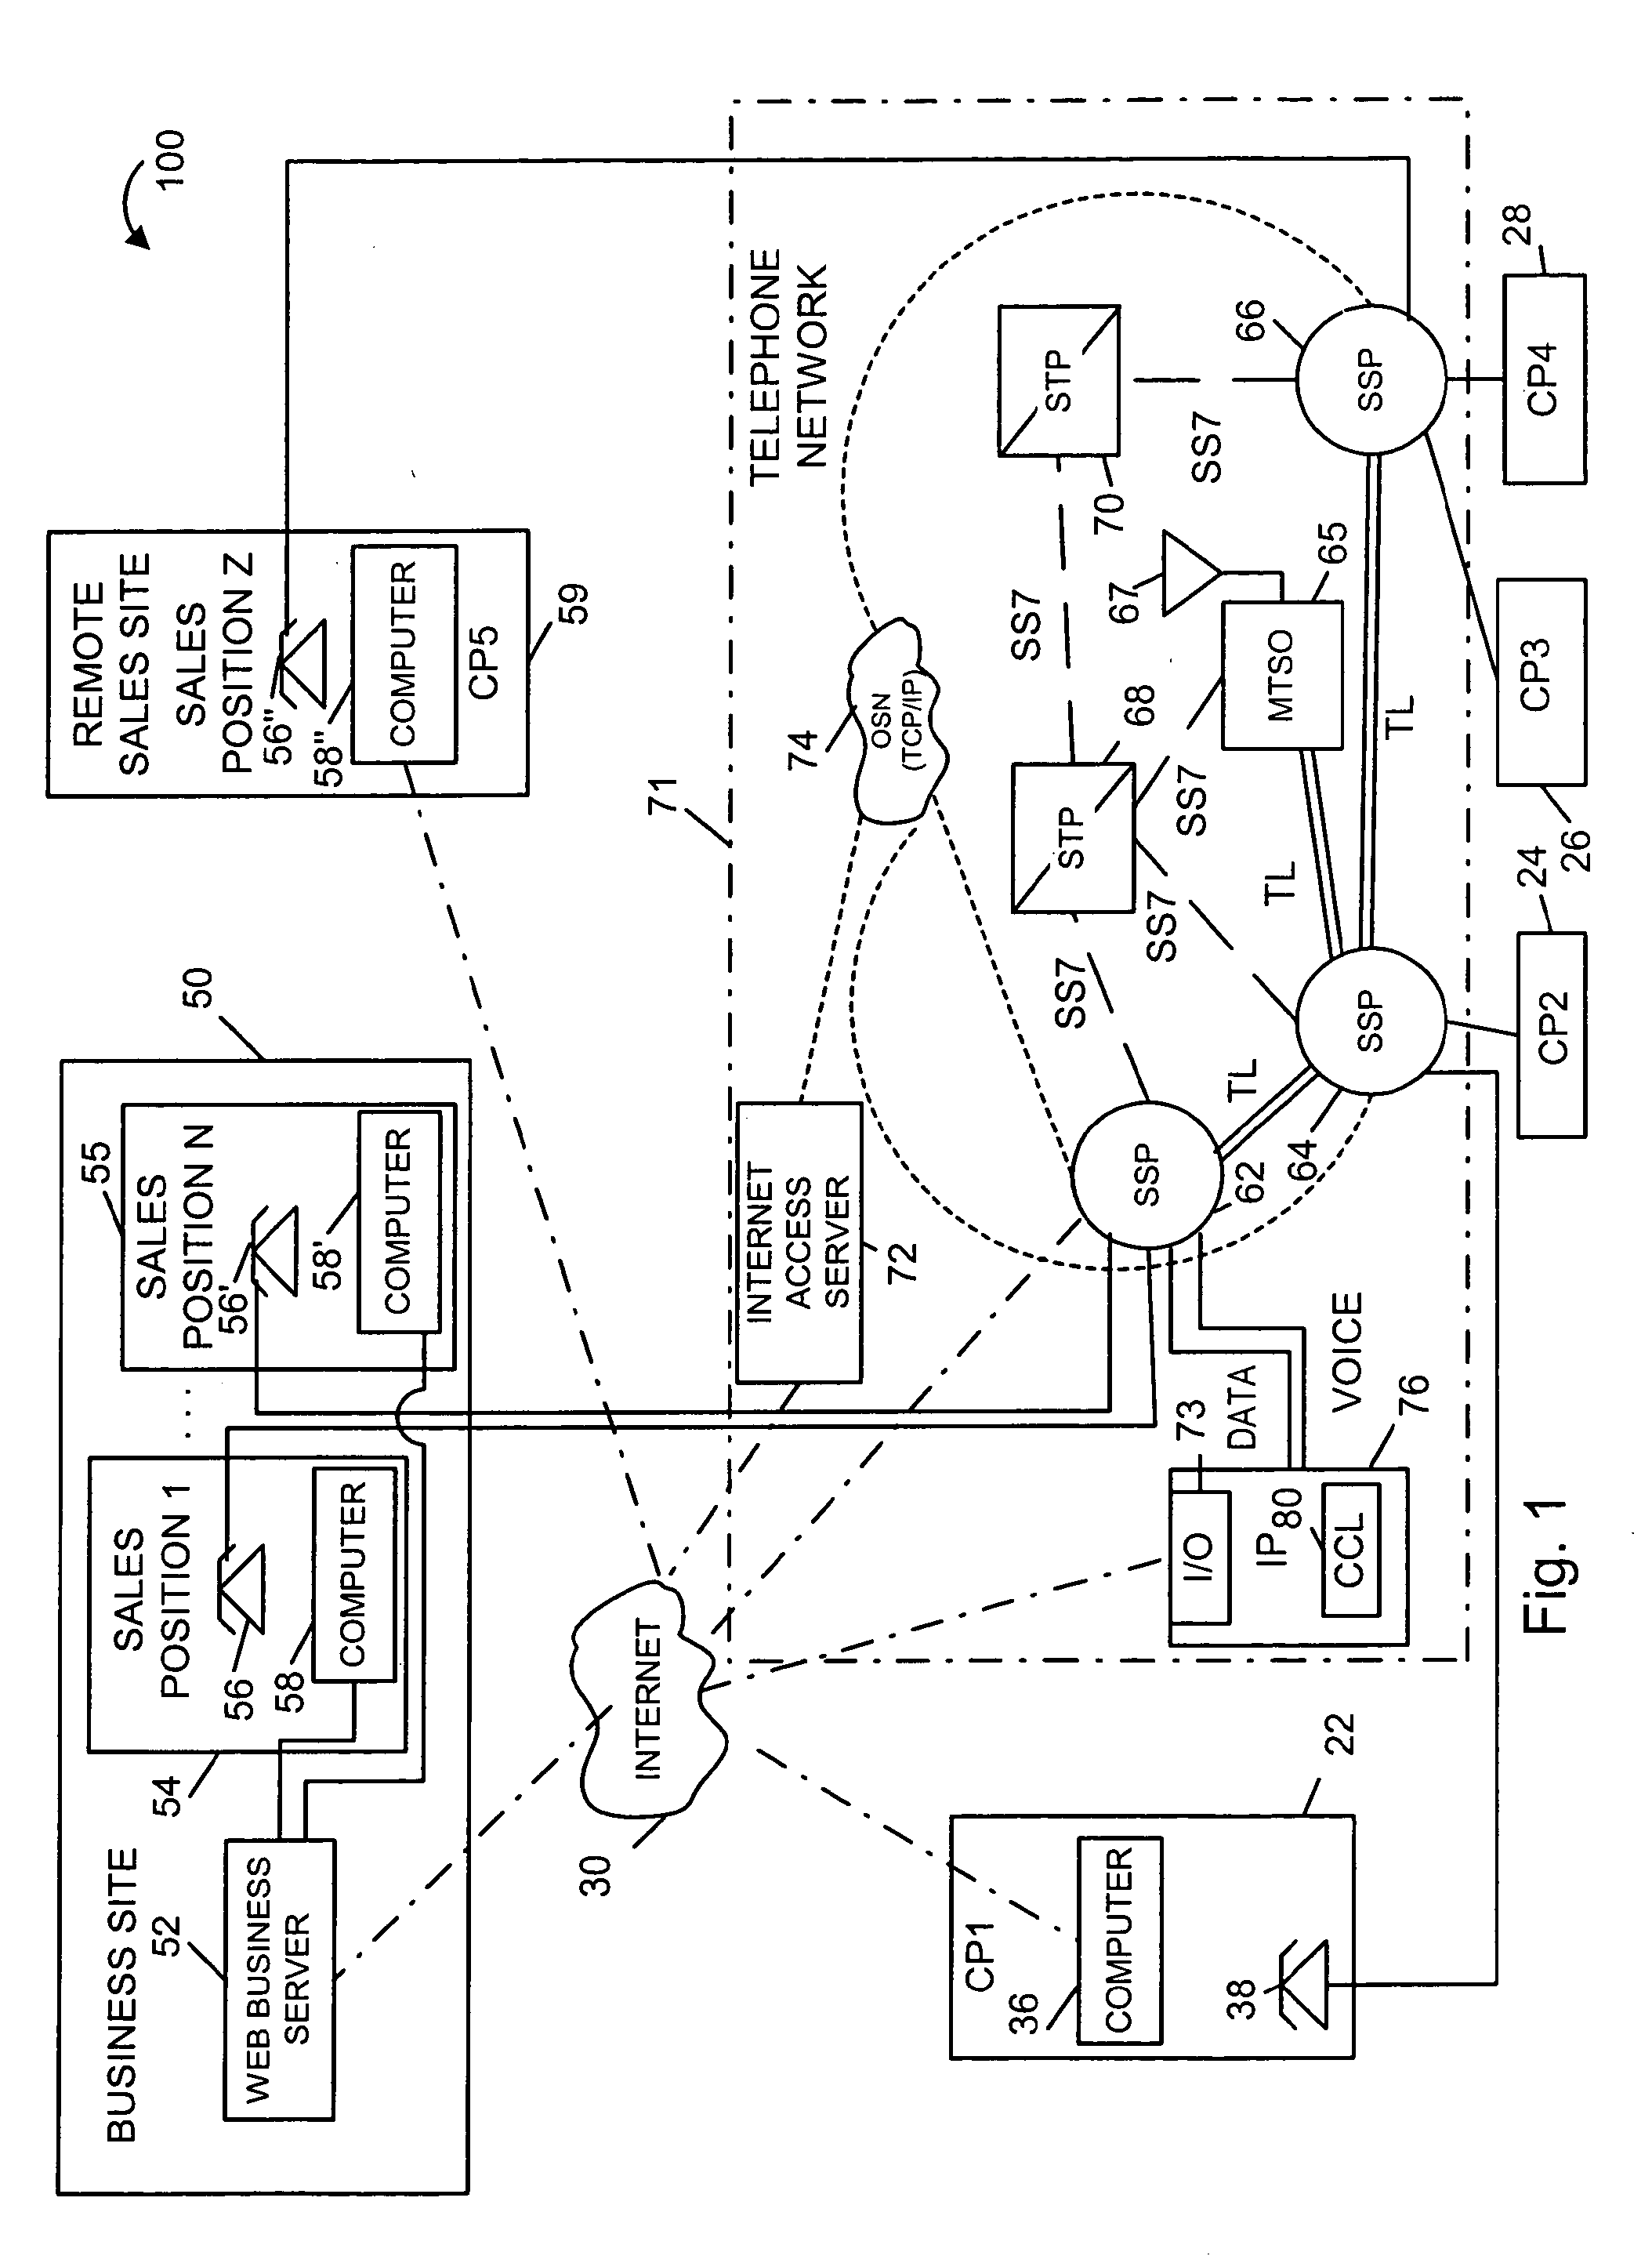 Method and apparatus for providing telephone support for internet sales